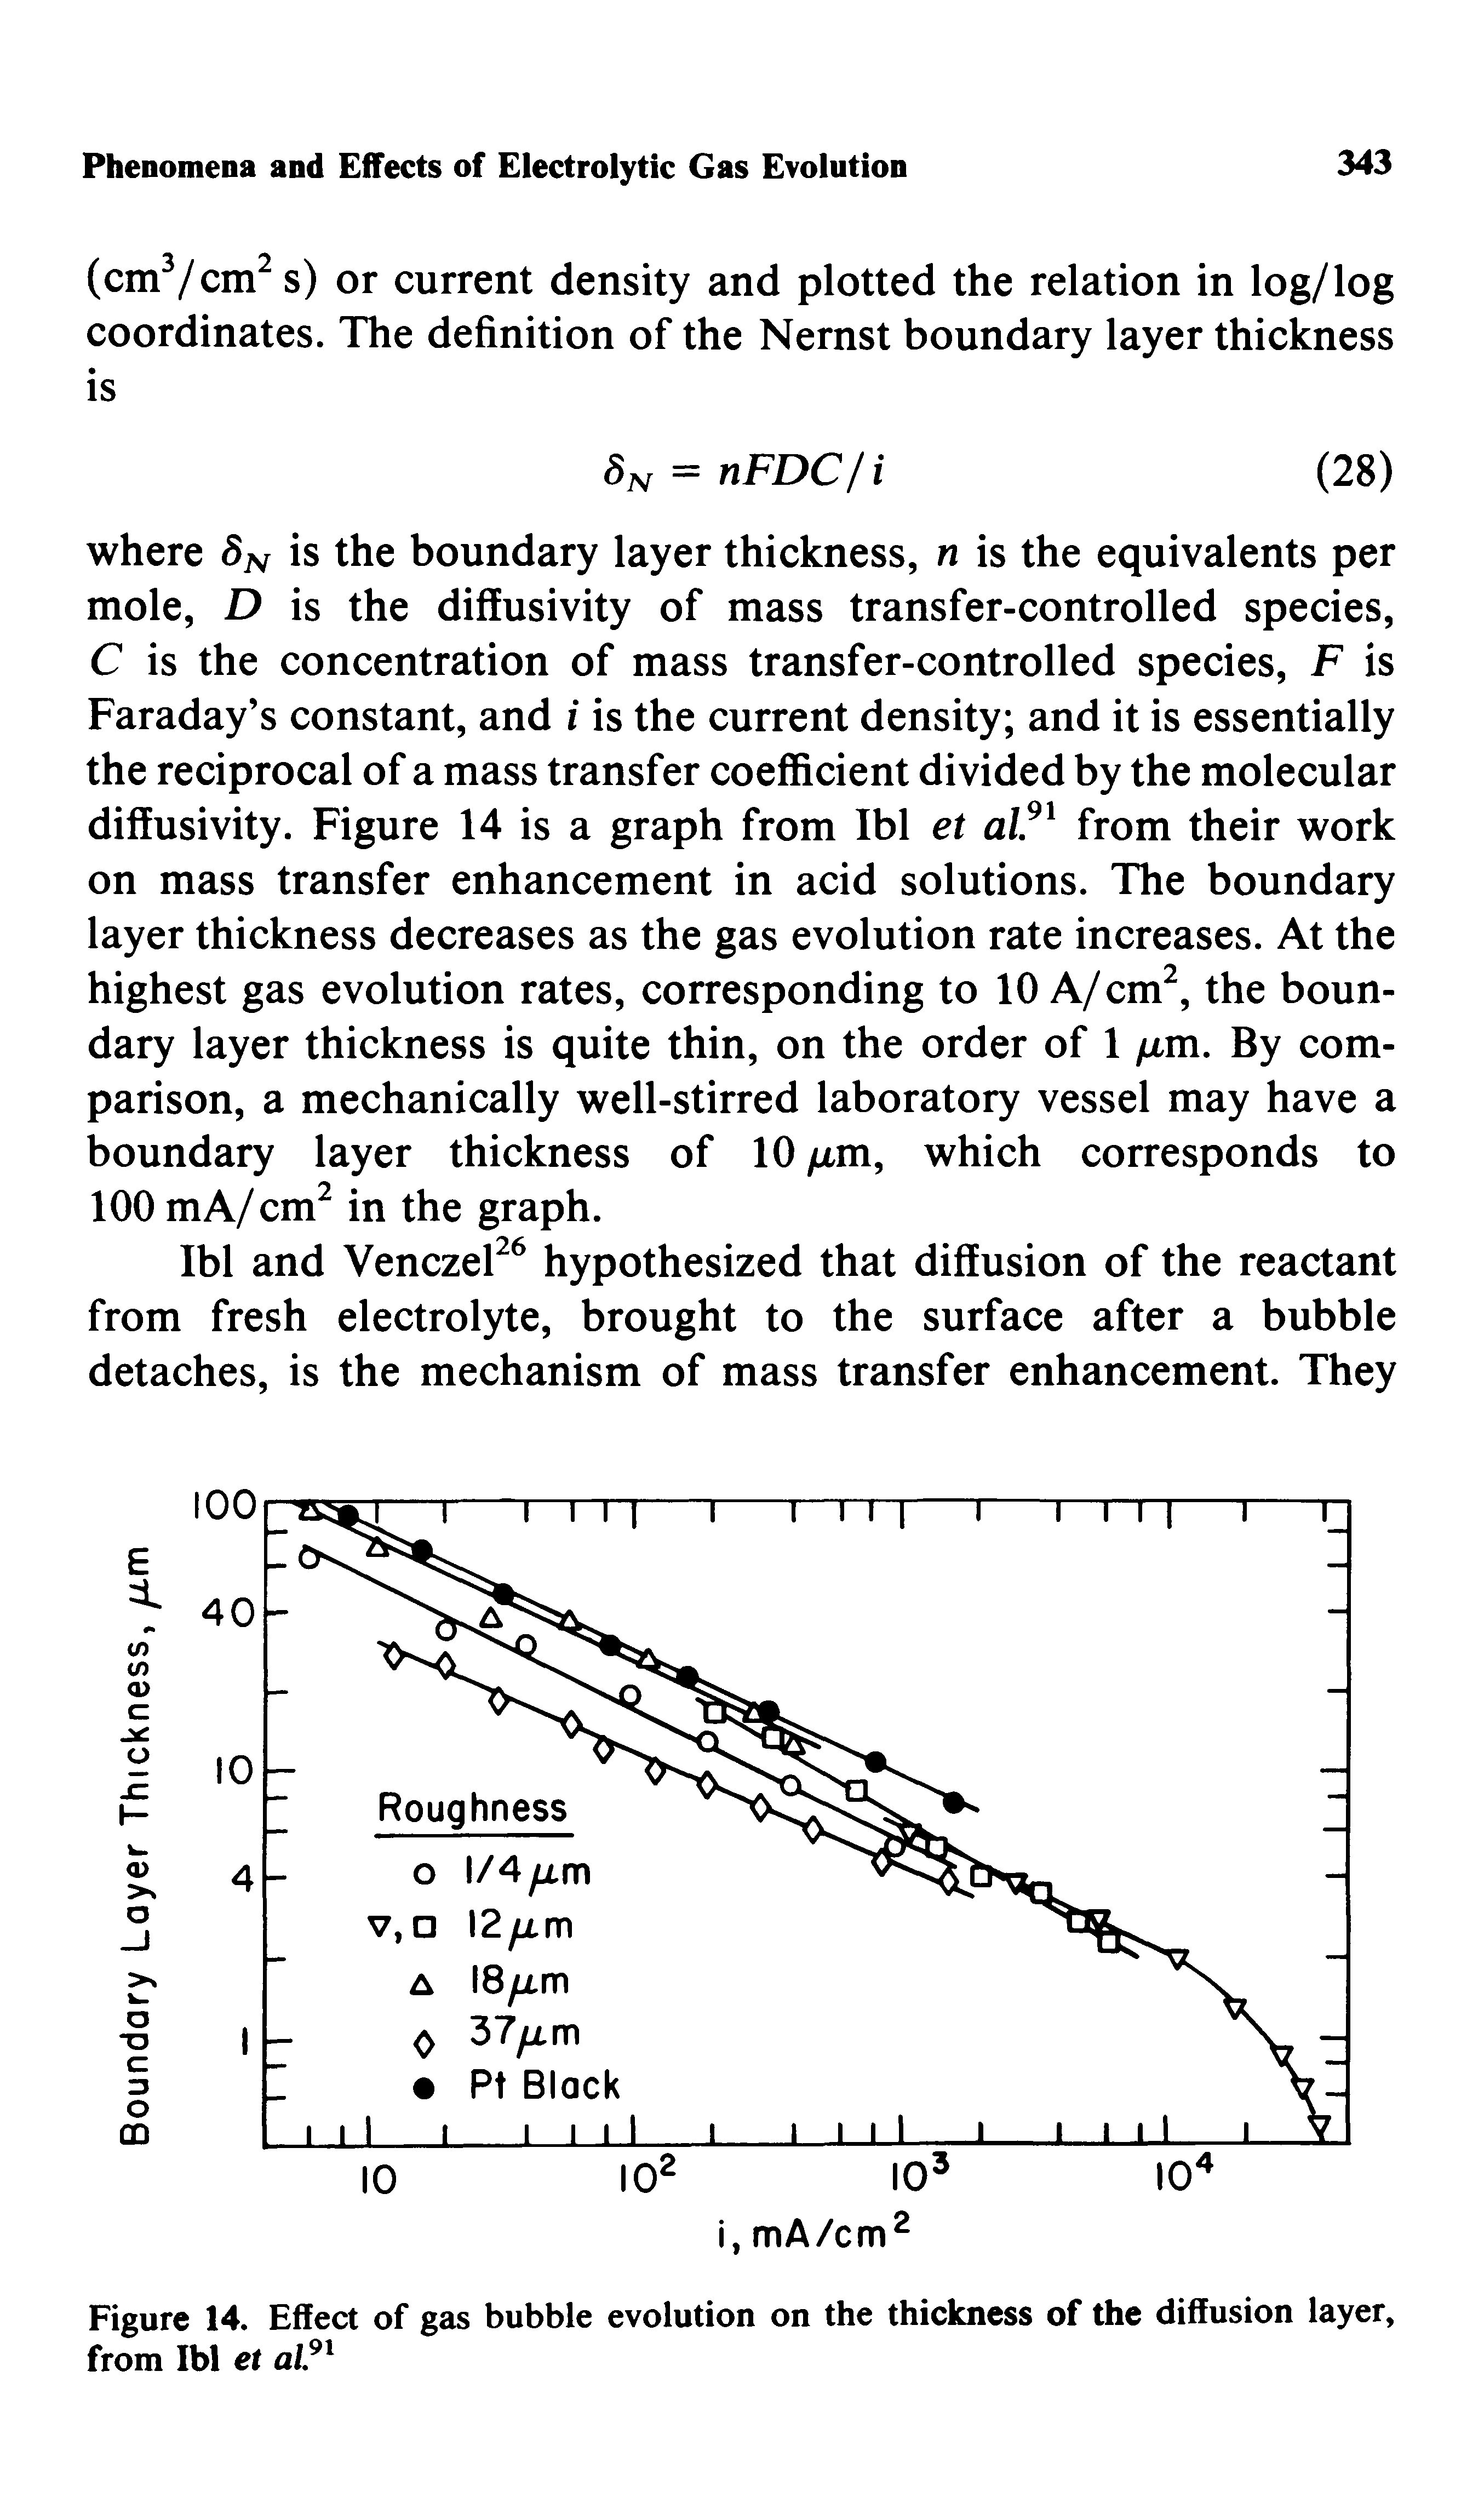 Figure 14. Effect of gas bubble evolution on the thickness of the diffusion layer, from Ibl et al.91...